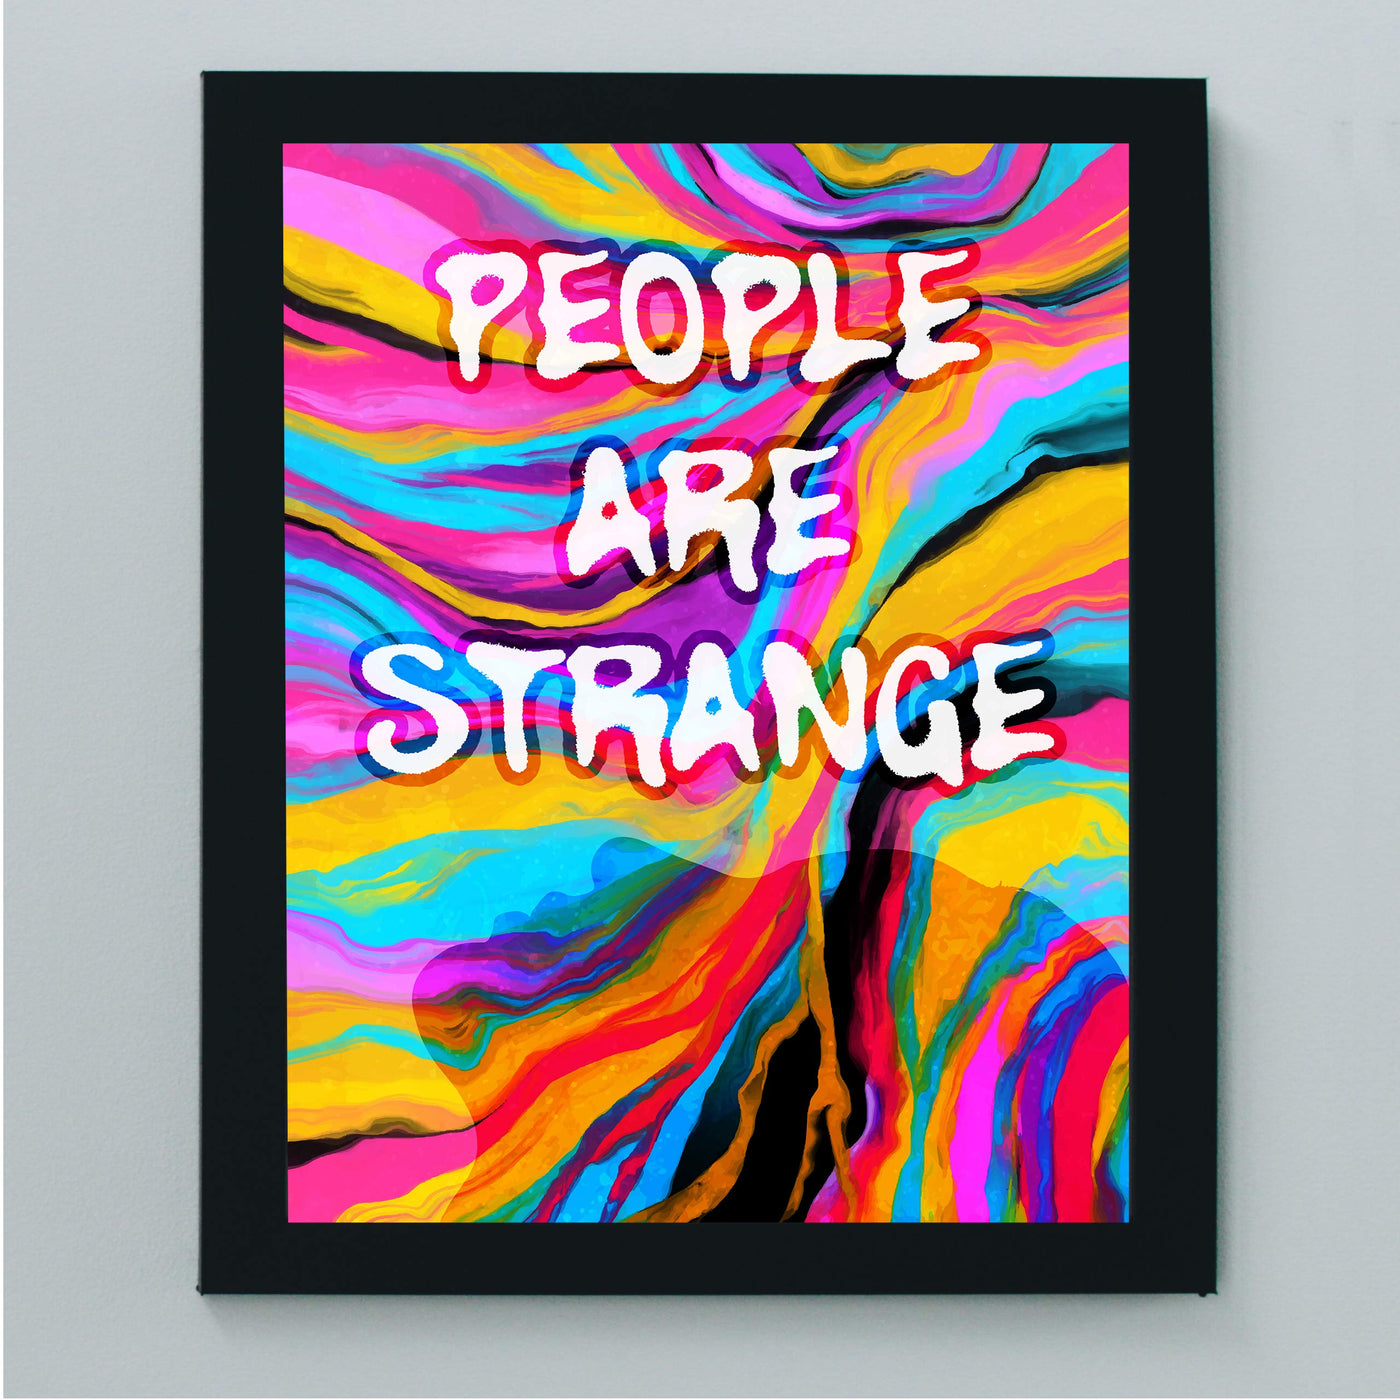 People Are Strange Funny Quotes Wall Sign -8 x 10" Retro Abstract Art Print -Ready to Frame. Humorous Decoration for Home-Office-Studio-Cave-Dorm Decor. Great Novelty Gift! Perfect for Teens!